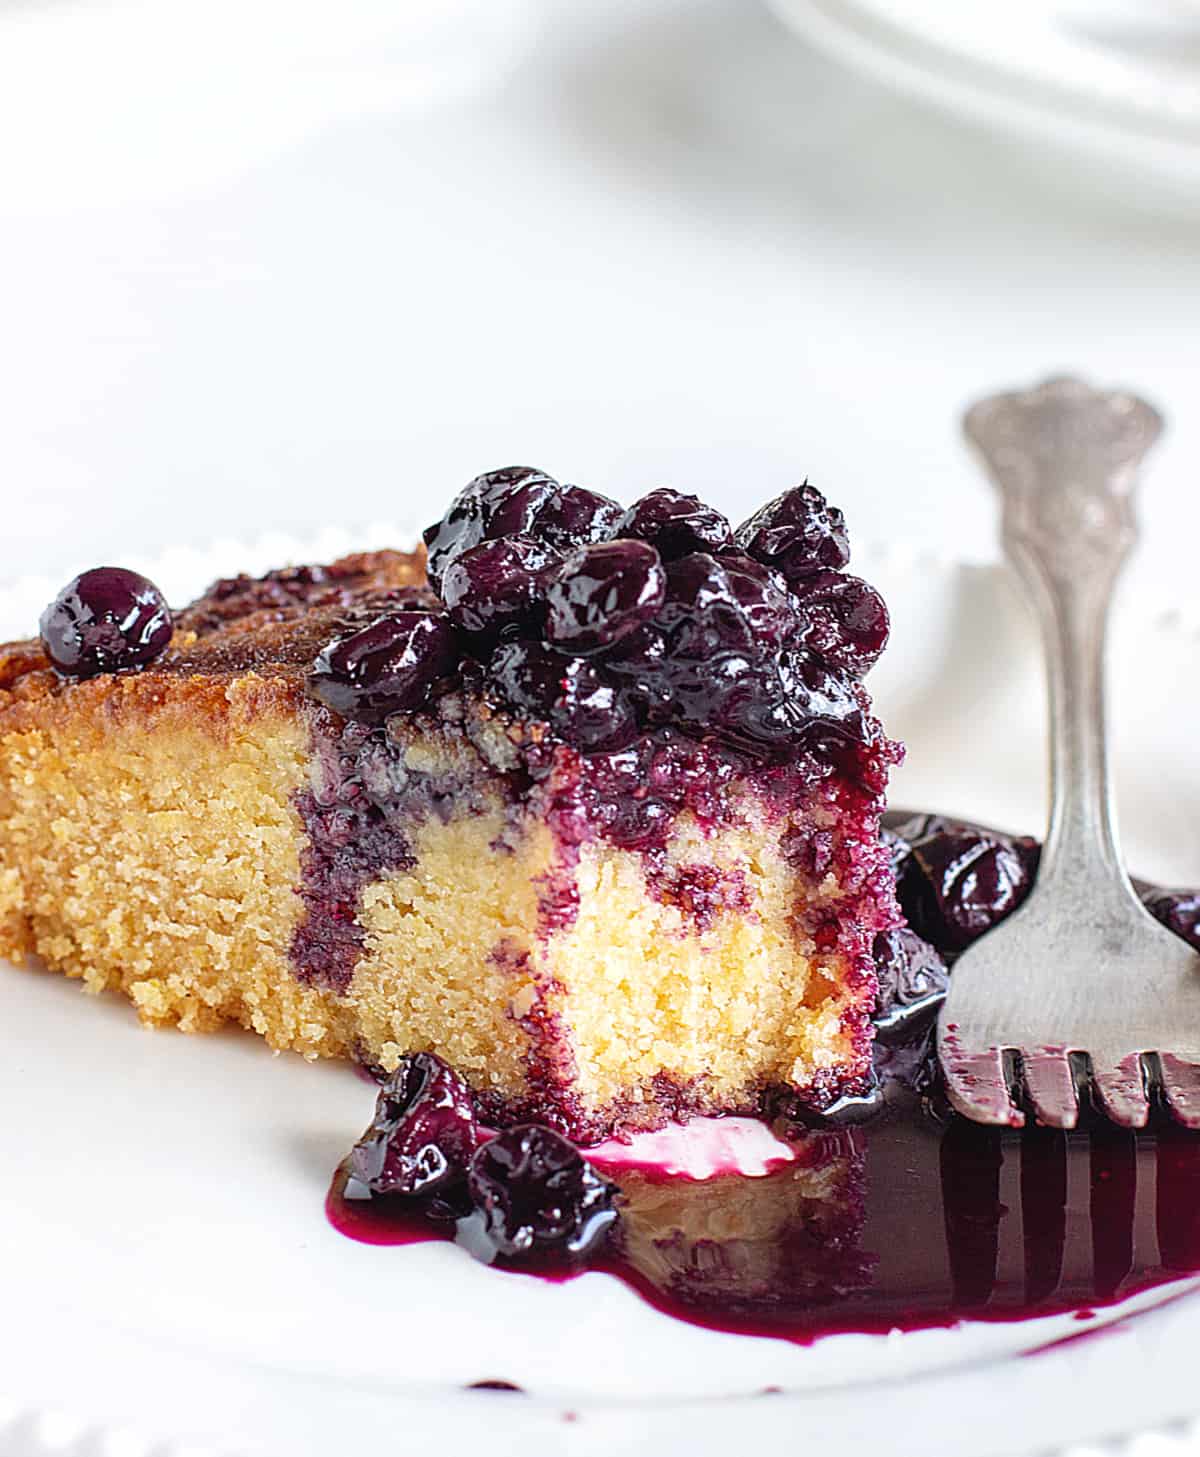 Eaten slice of polenta cake with pool of blueberry sauce, white plate, silver fork